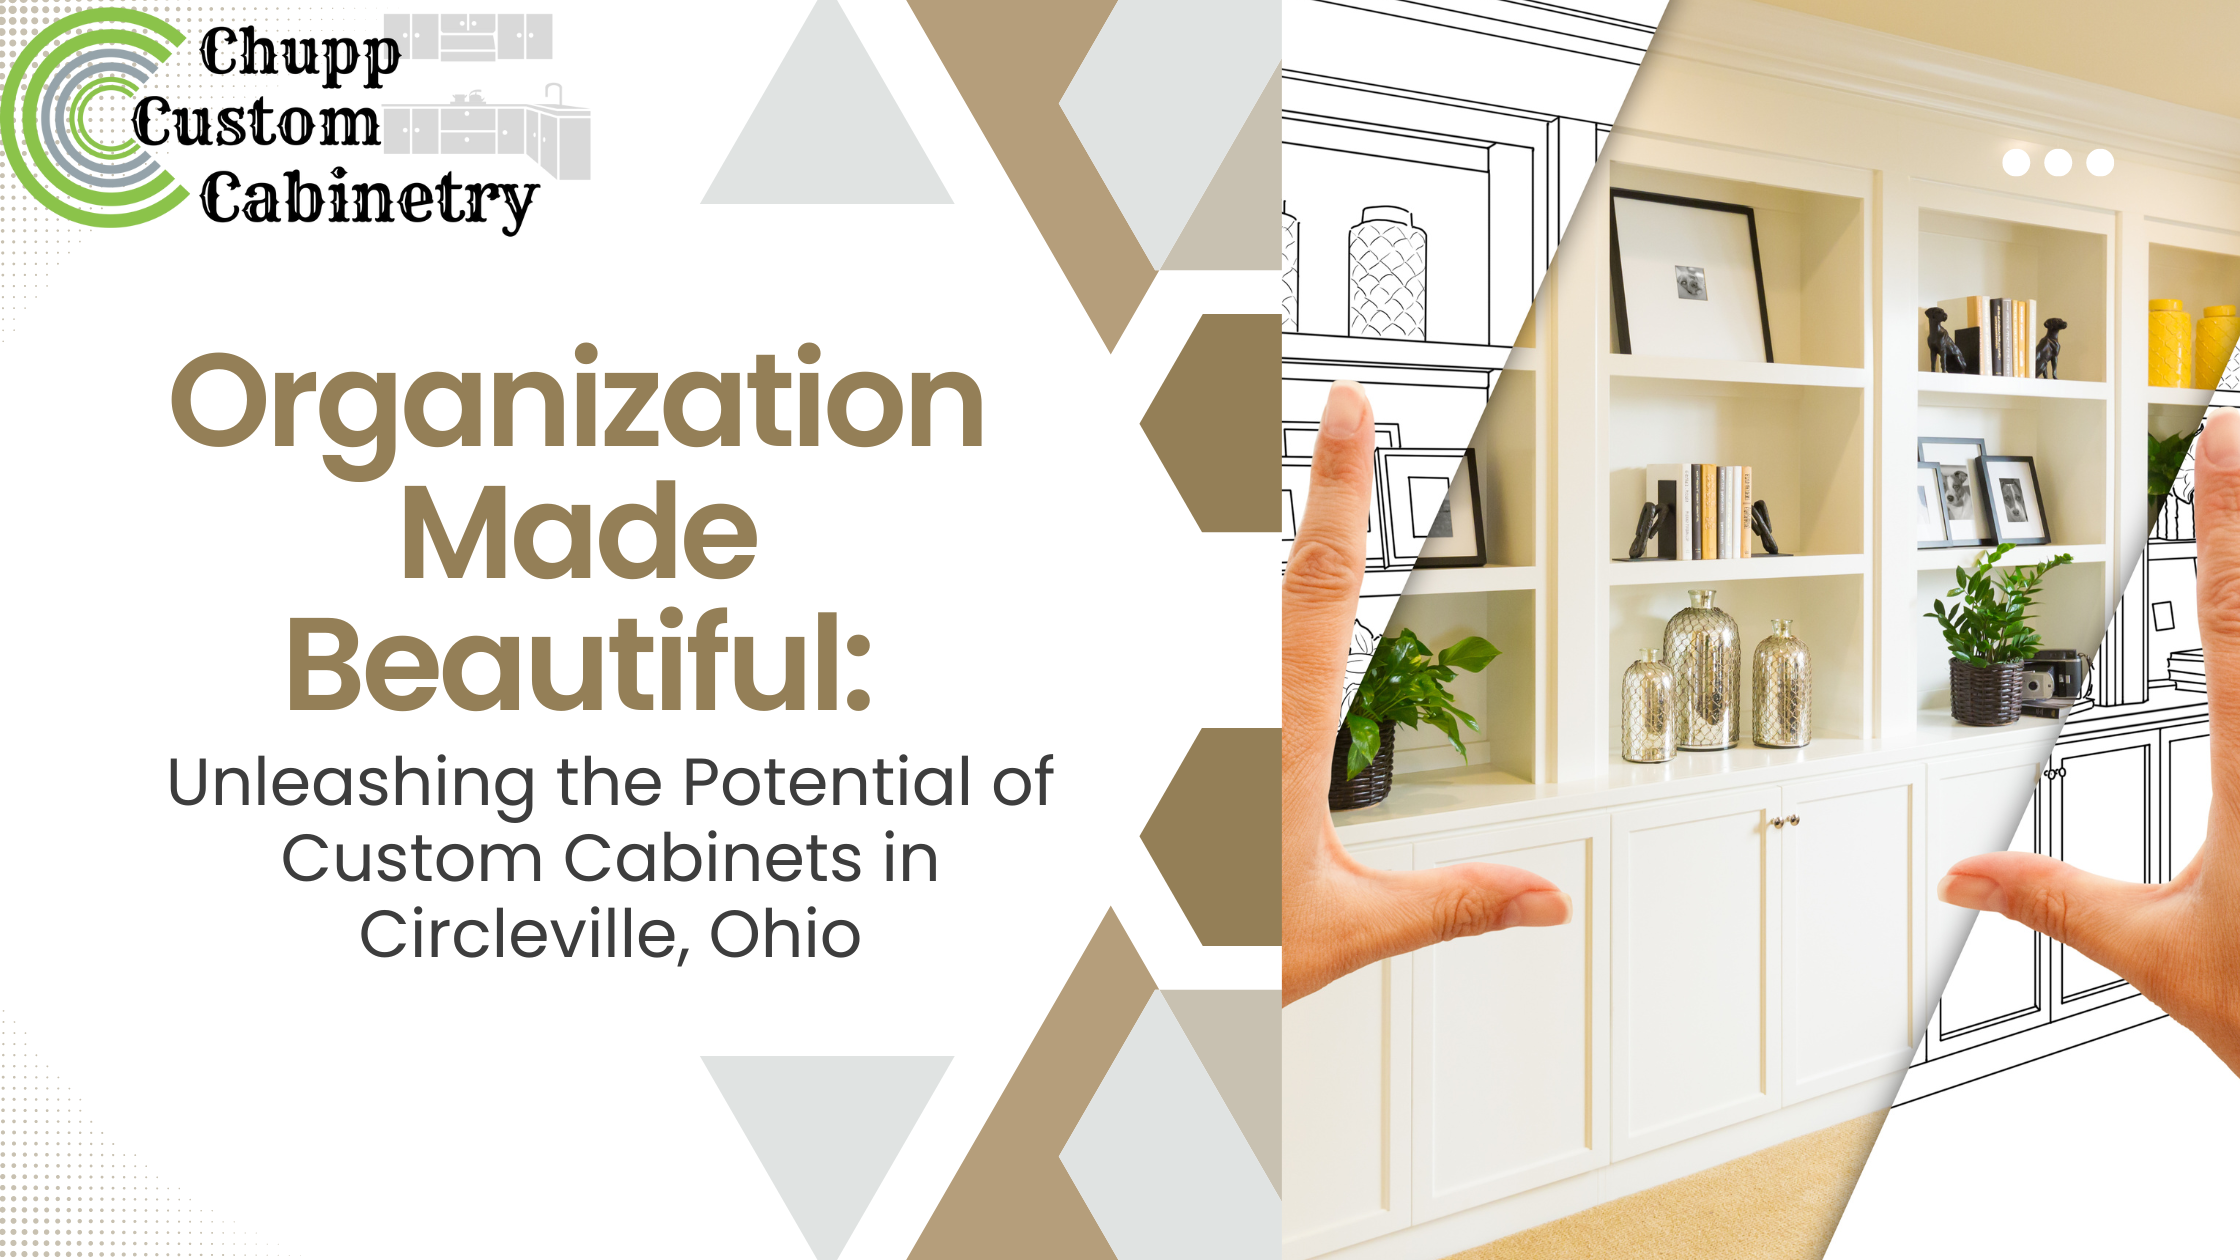 Organization Made Beautiful: Unleashing the Potential of Custom Cabinets in Circleville, Ohio